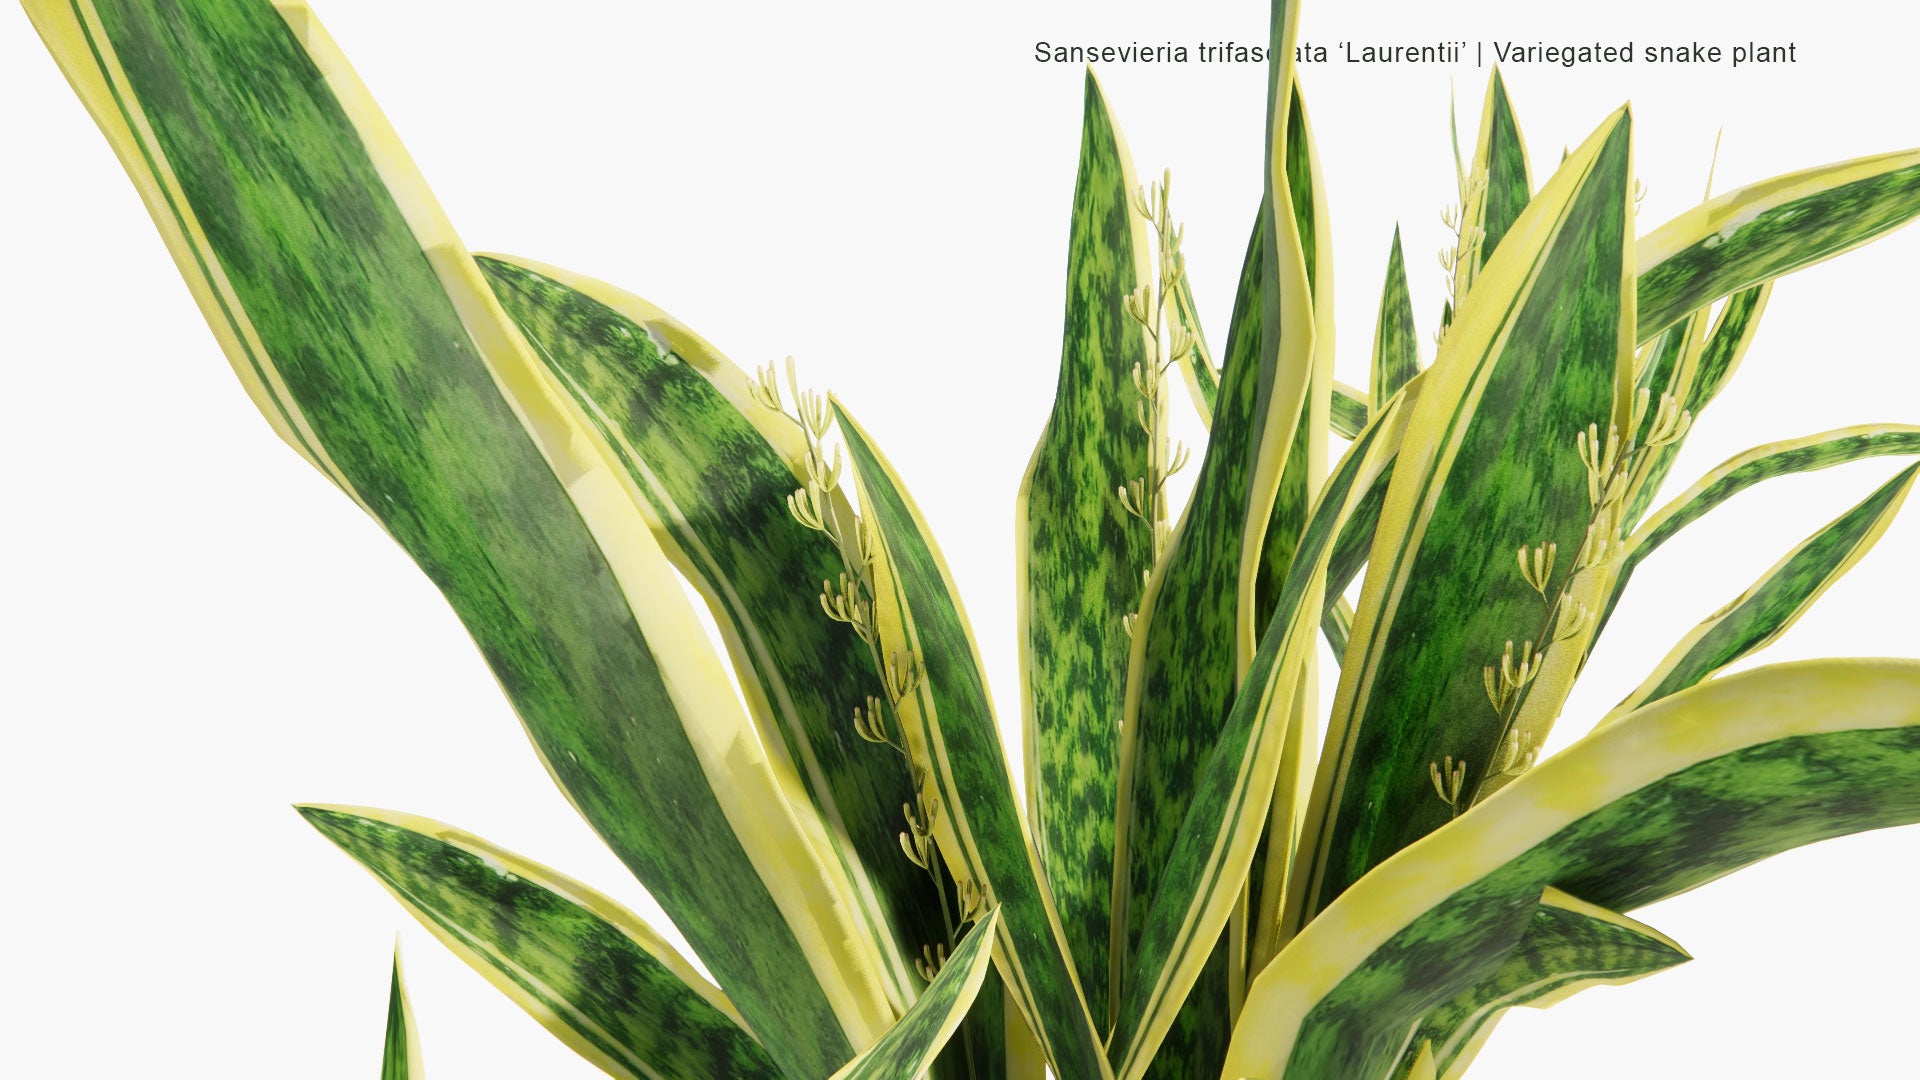 Low Poly Sansevieria Trifasciata 'Laurentii' - Variegated Snake Plant, Saint George's Sword, Mother-in-Law's Tongue, Viper's Bowstring Hemp (3D Model)